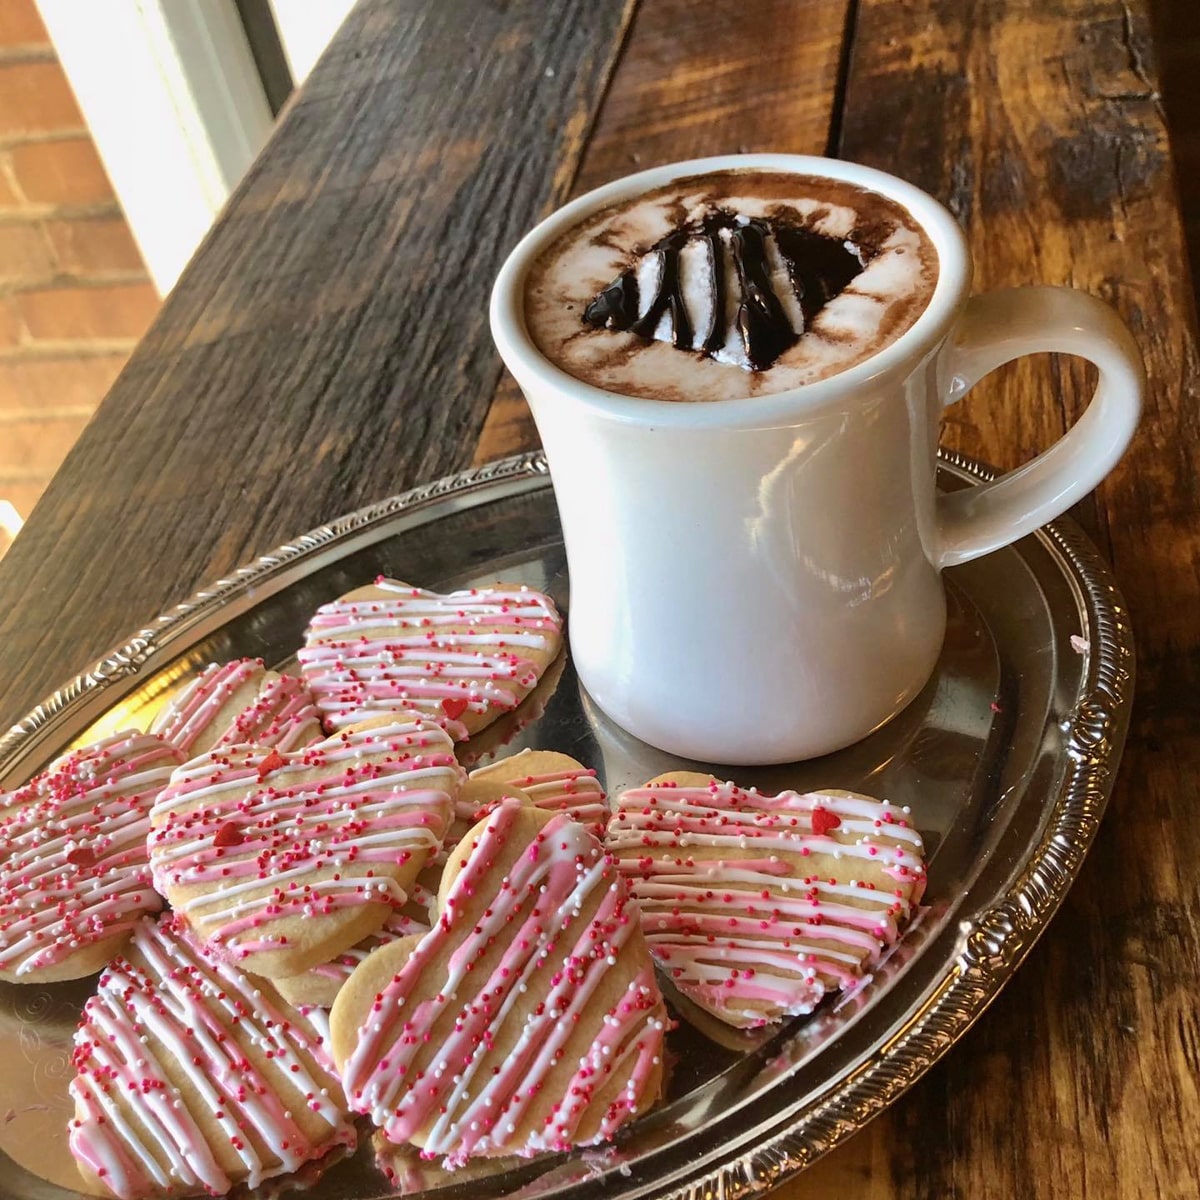 Hot chocolate and cookies at the Hot Chocolatier